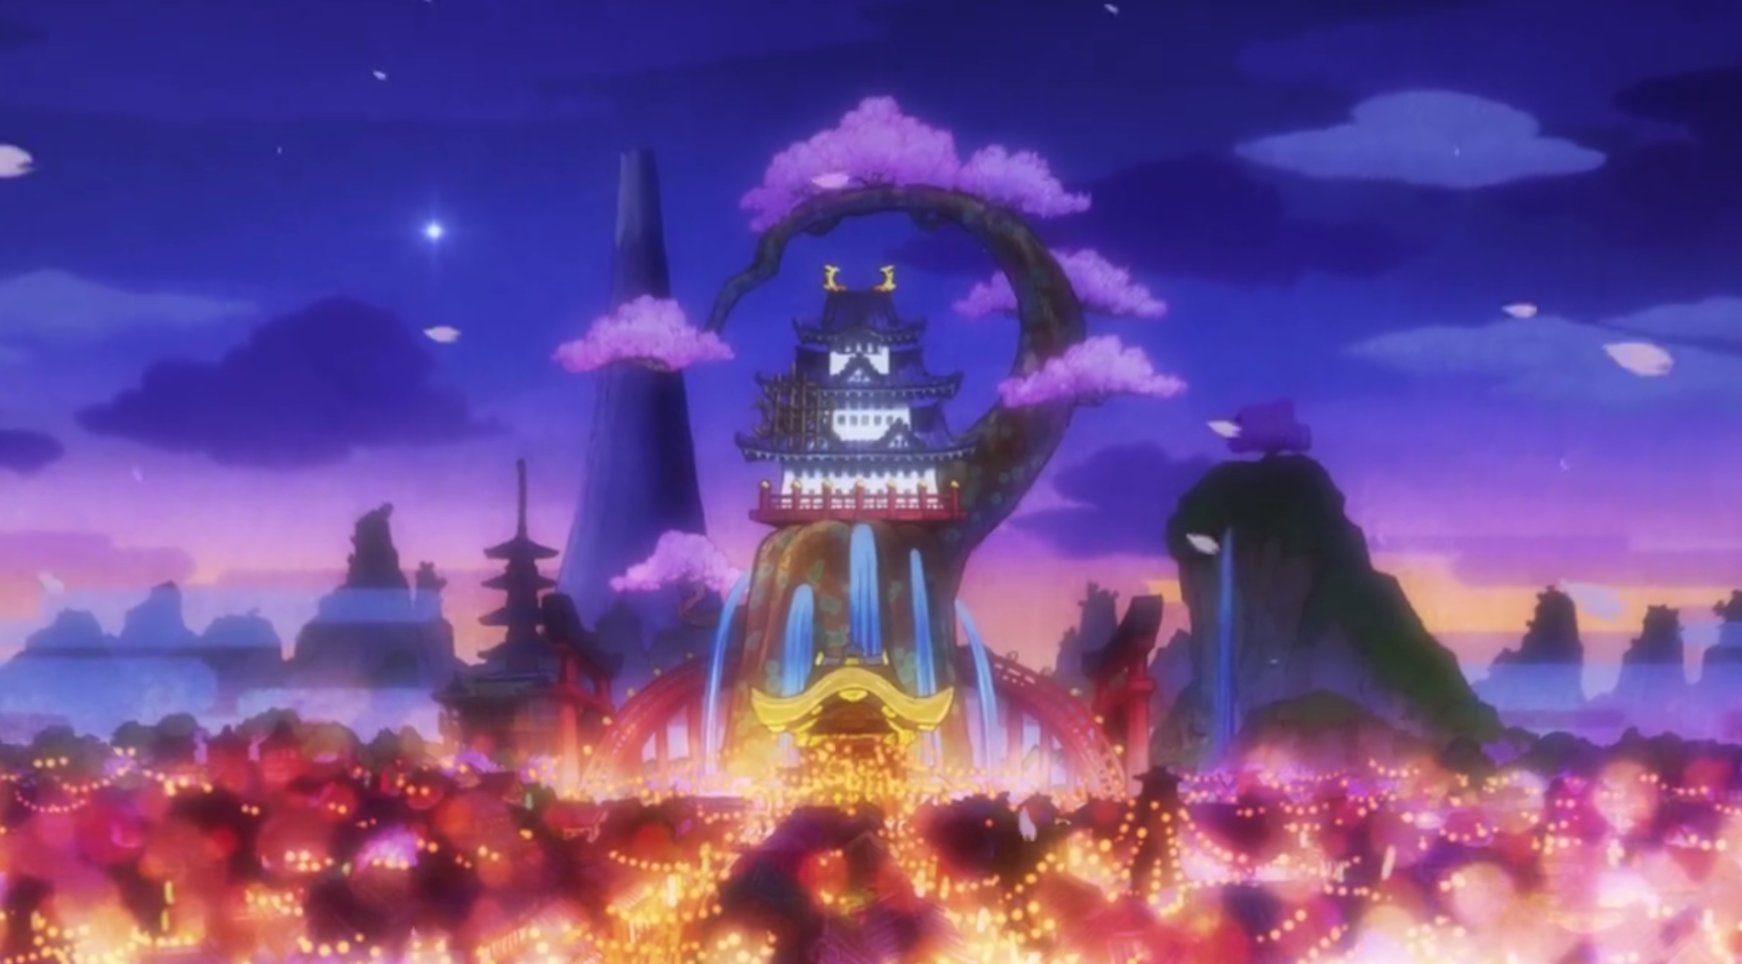 Artur Library Of Ohara The One Piece Anime Continues To Be Absolutely Beautiful T Co S7niy3xrop Twitter